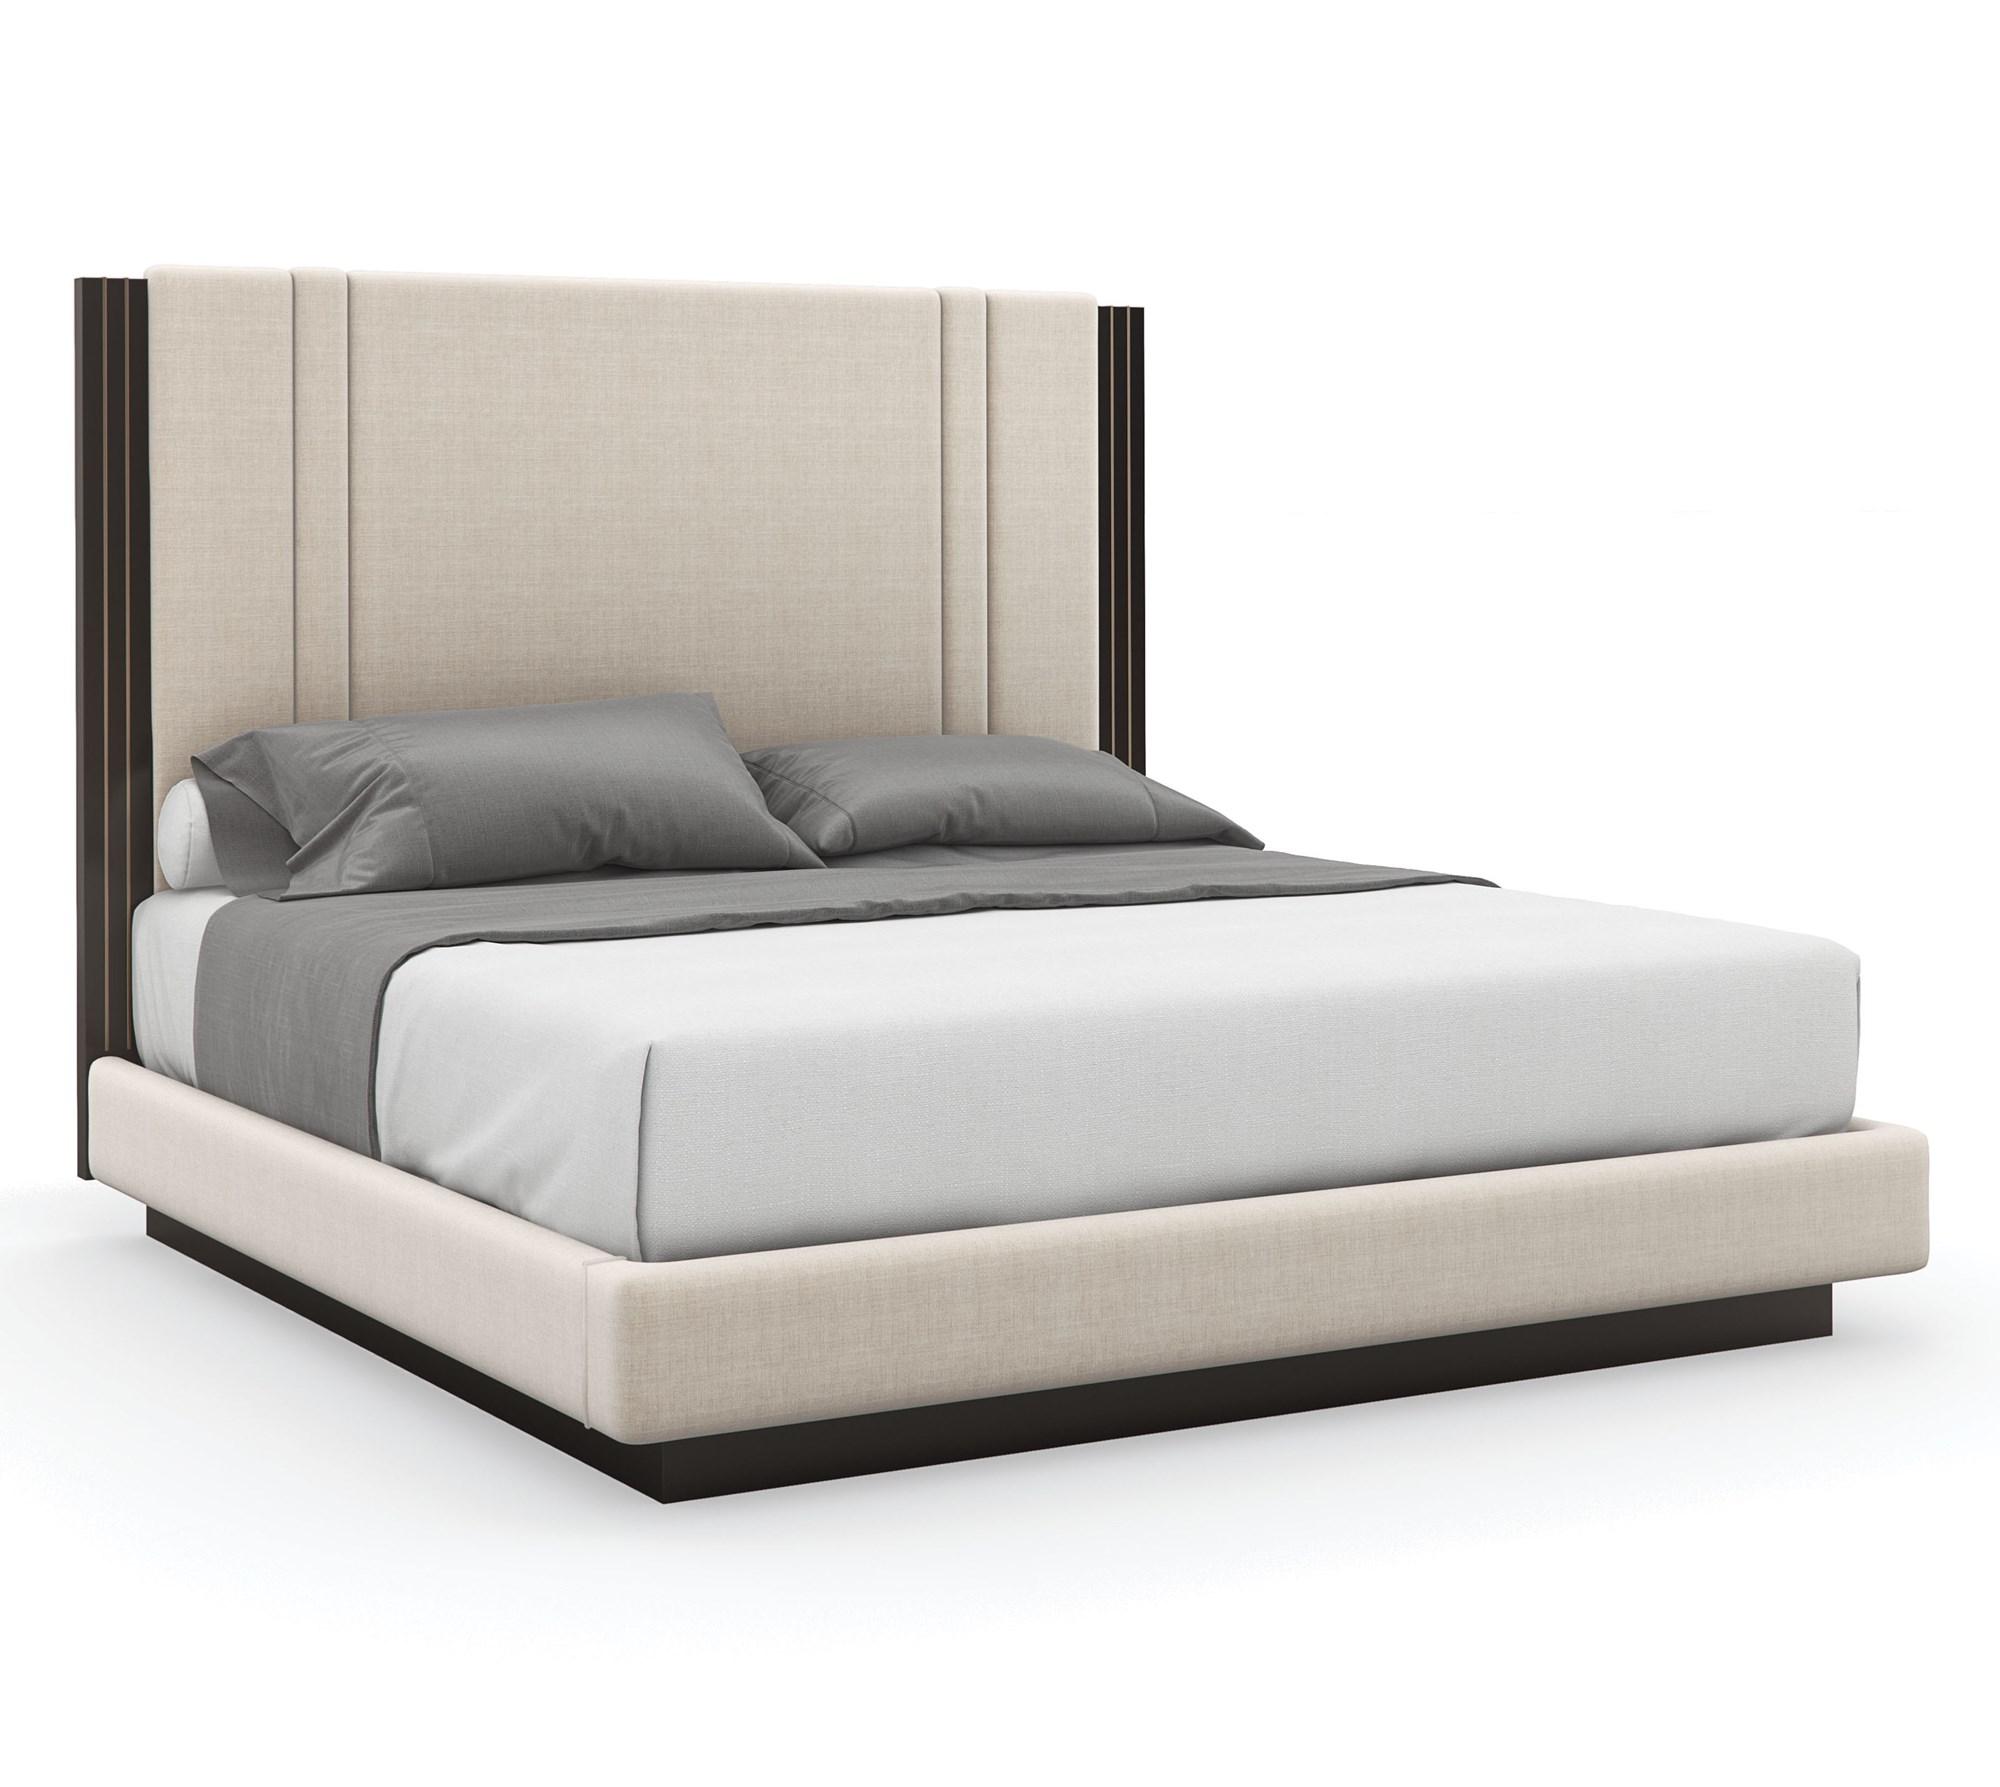 Contemporary Platform Bed DECENT PROPOSAL CLA-020-105 in Light Gray Fabric